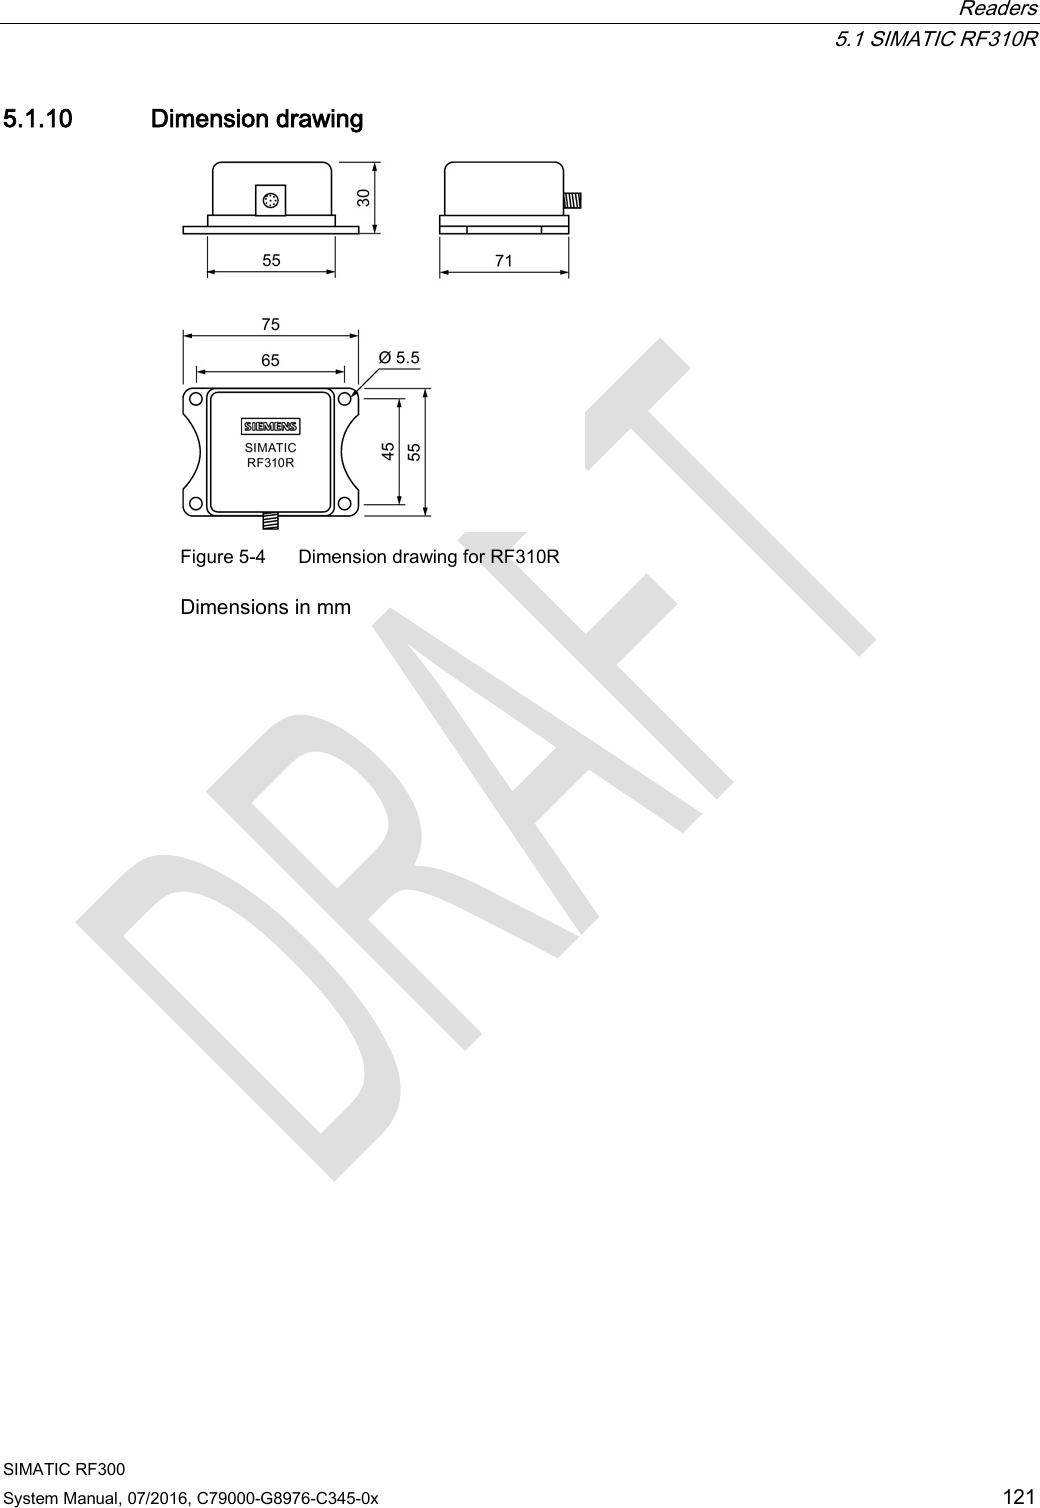  Readers  5.1 SIMATIC RF310R SIMATIC RF300 System Manual, 07/2016, C79000-G8976-C345-0x 121 5.1.10 Dimension drawing  Figure 5-4  Dimension drawing for RF310R Dimensions in mm 